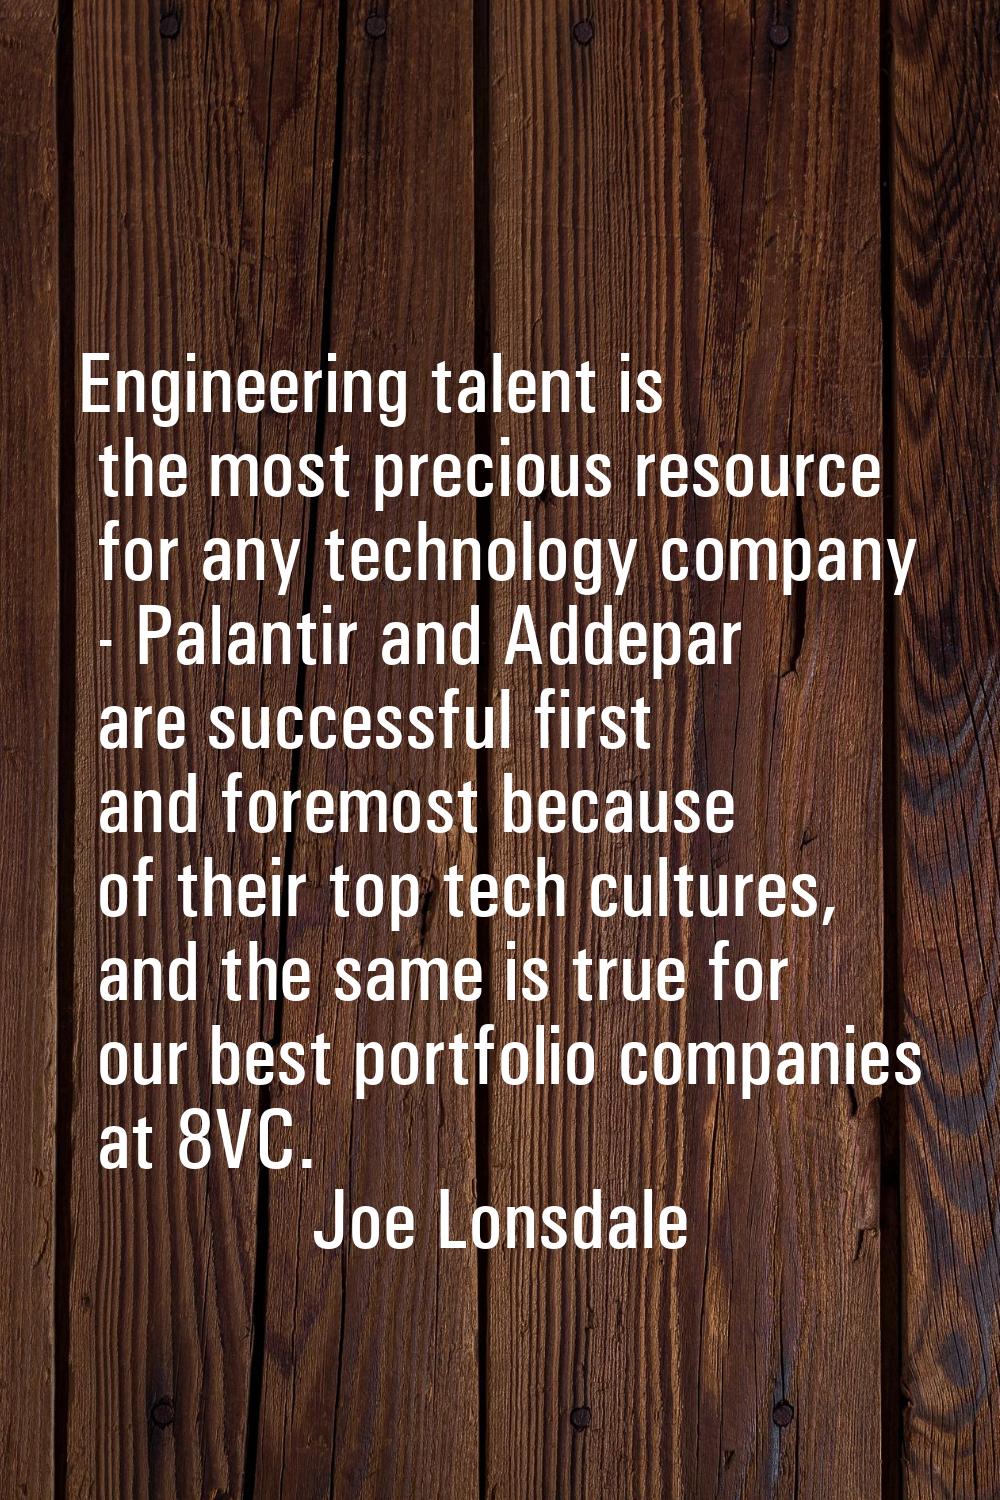 Engineering talent is the most precious resource for any technology company - Palantir and Addepar 